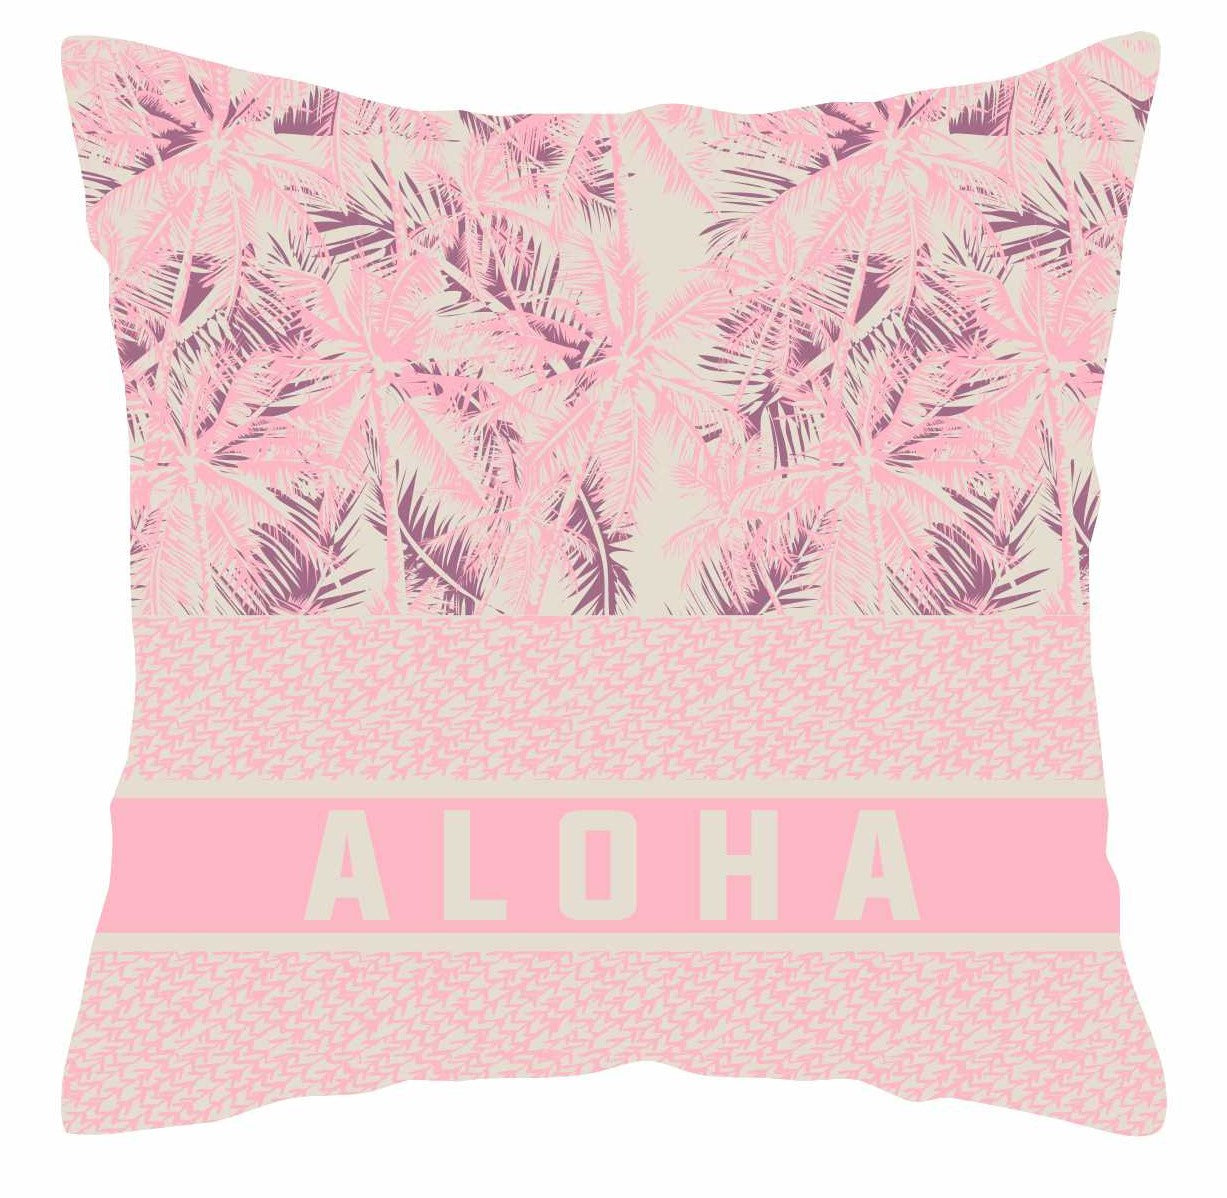 PILLOW COVER- DESIGNER STYLIZED